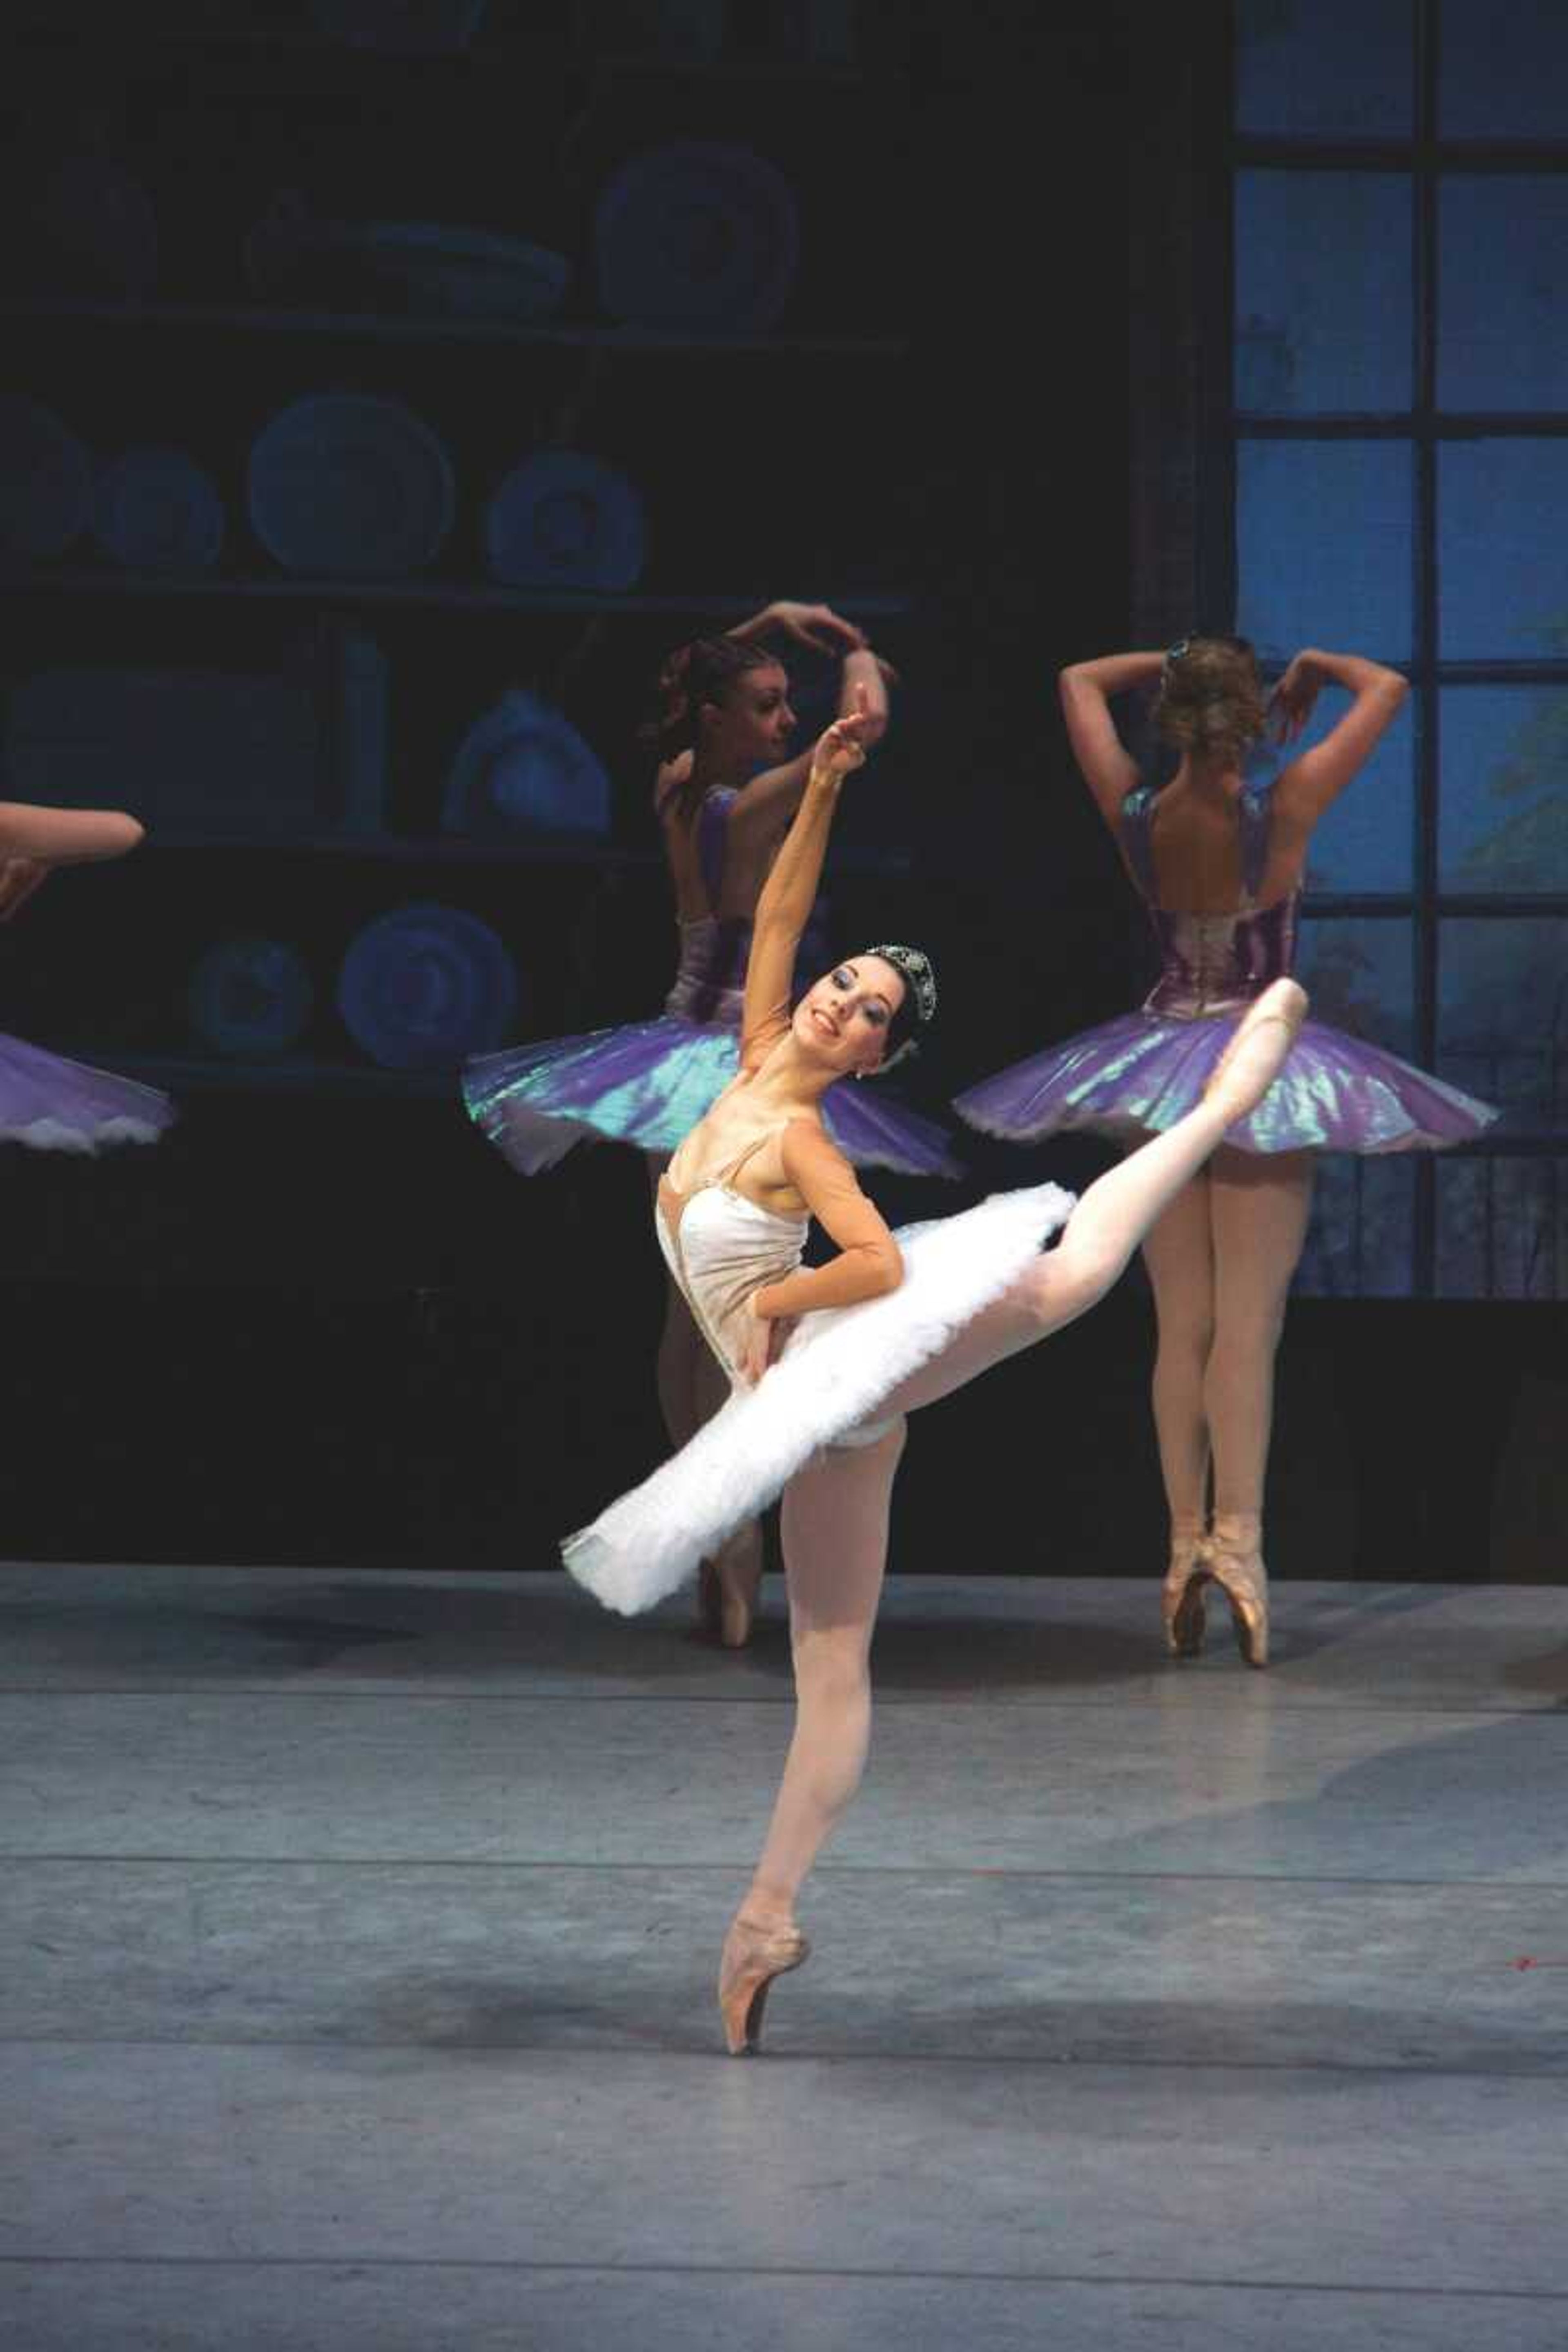 The Moscow Festival Ballet will perform "Cinderella" April 22 at Southeast's River Campus.